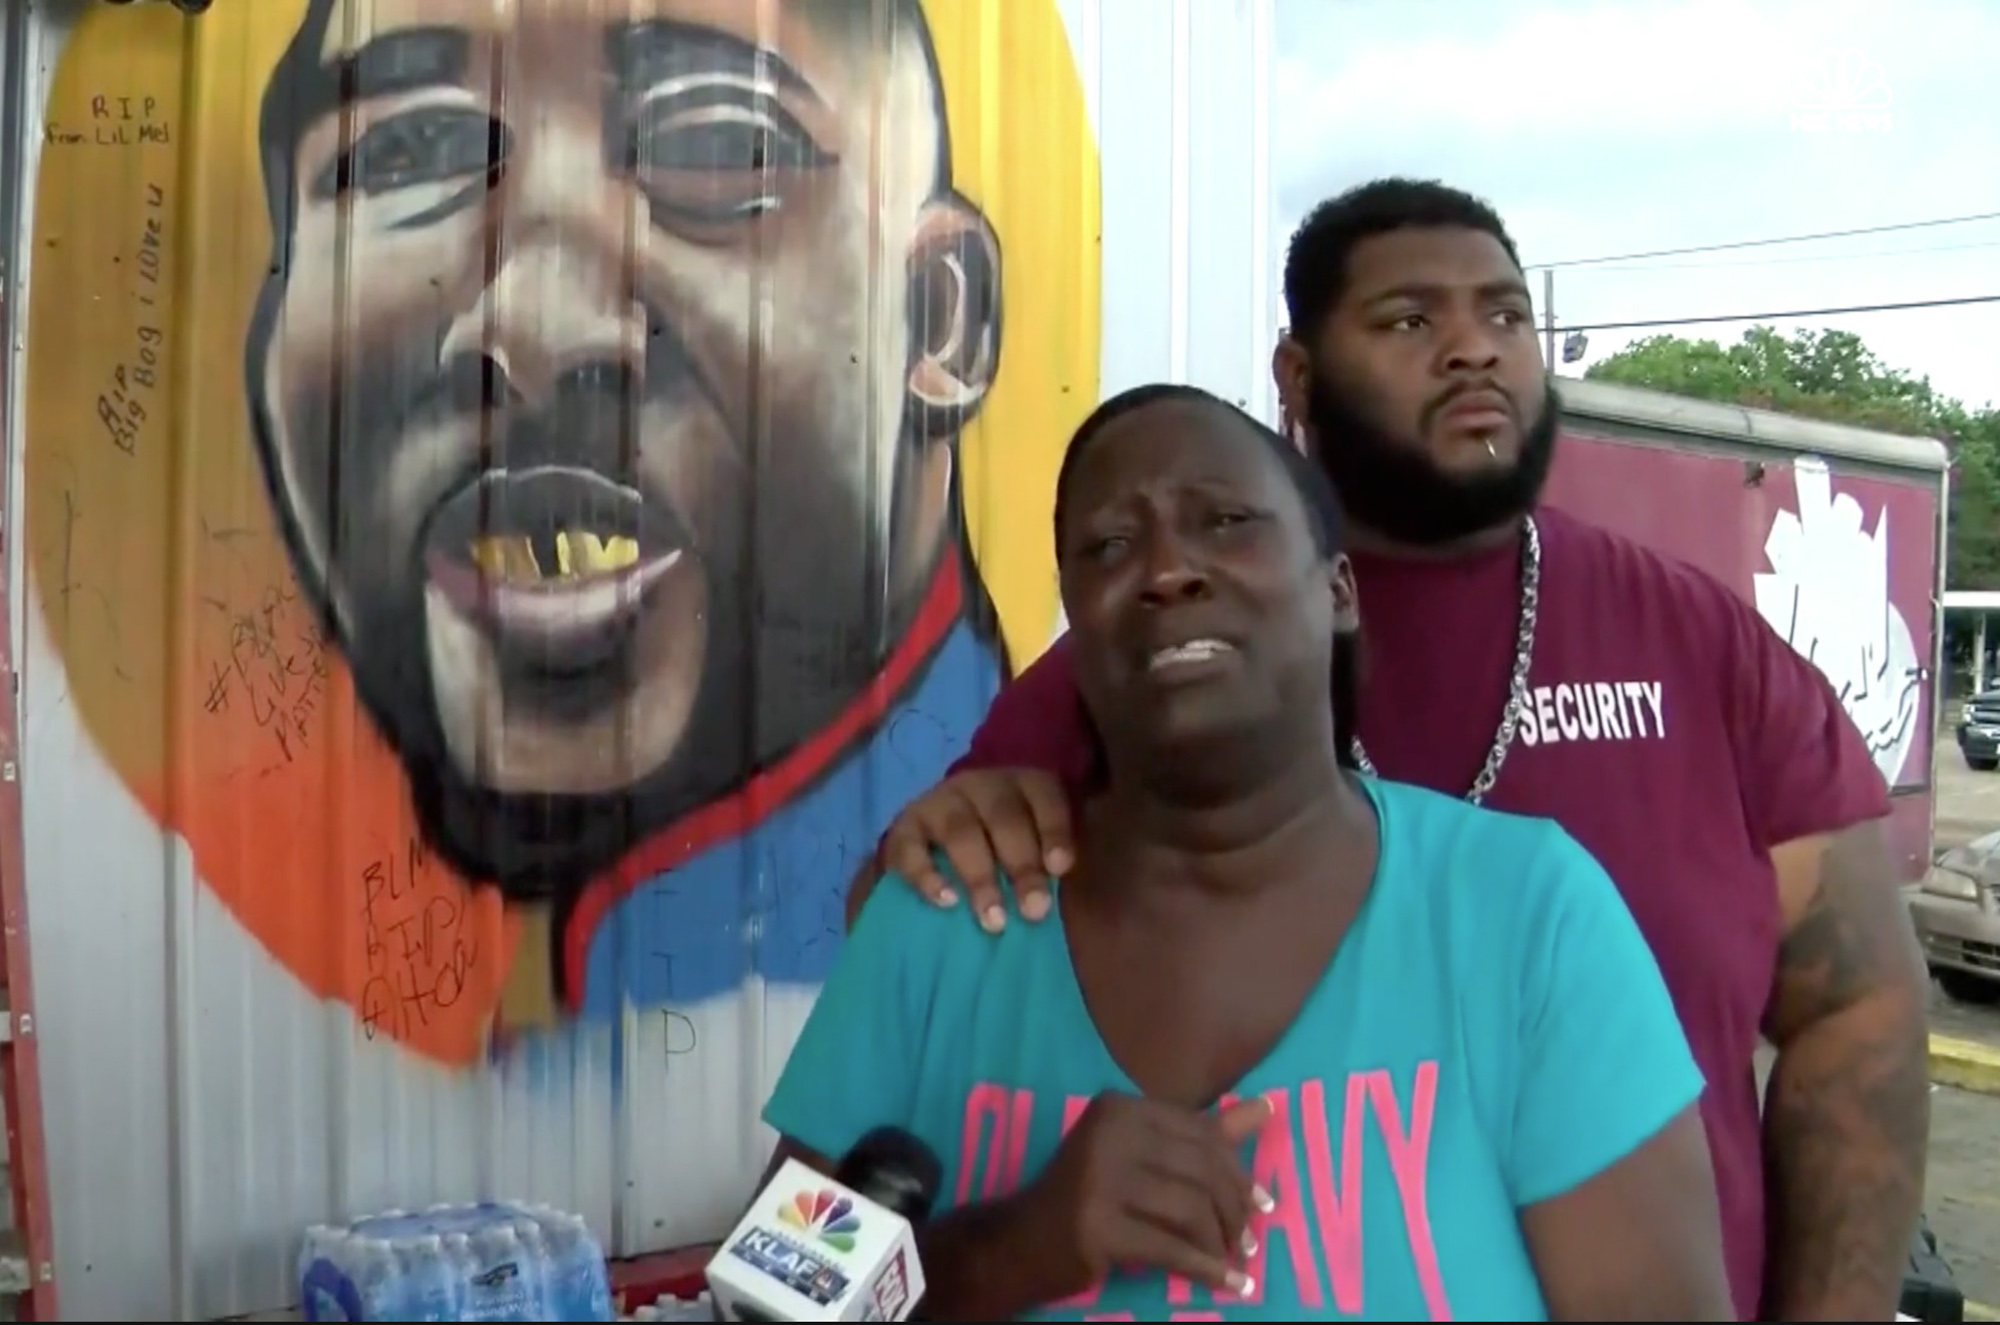 Alton Sterling's aunt, Veda Washington-Abusaleh, makes an emotional plea to end "bloodshed" after the deaths of three Baton Rouge police officers.